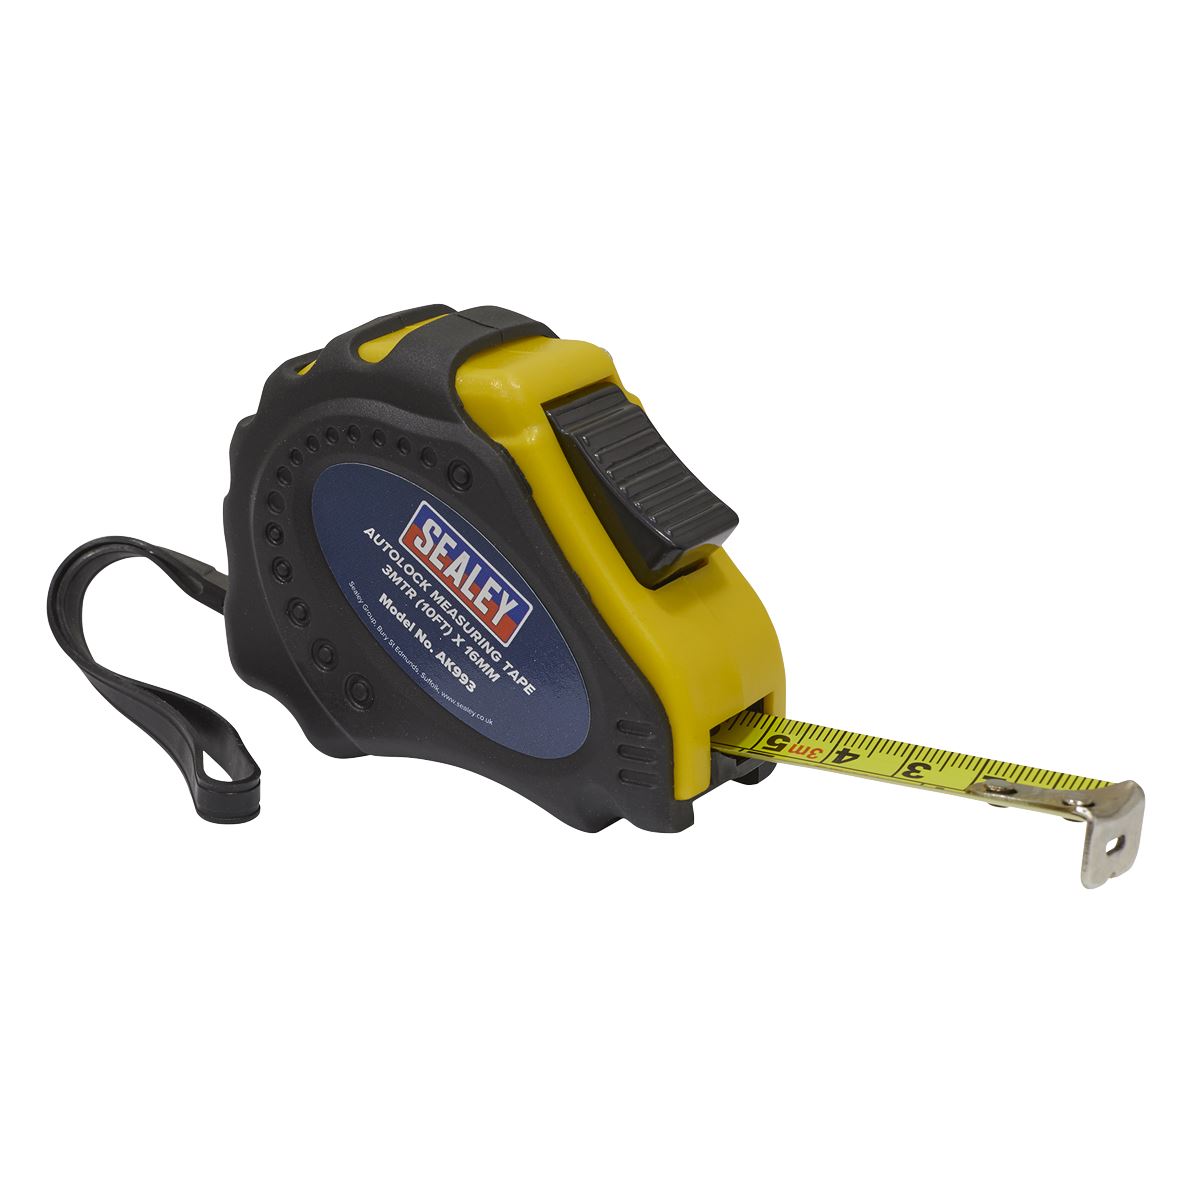 Sealey Auto Lock Tape Measure 3m(10ft) x 16mm - Metric/Imperial